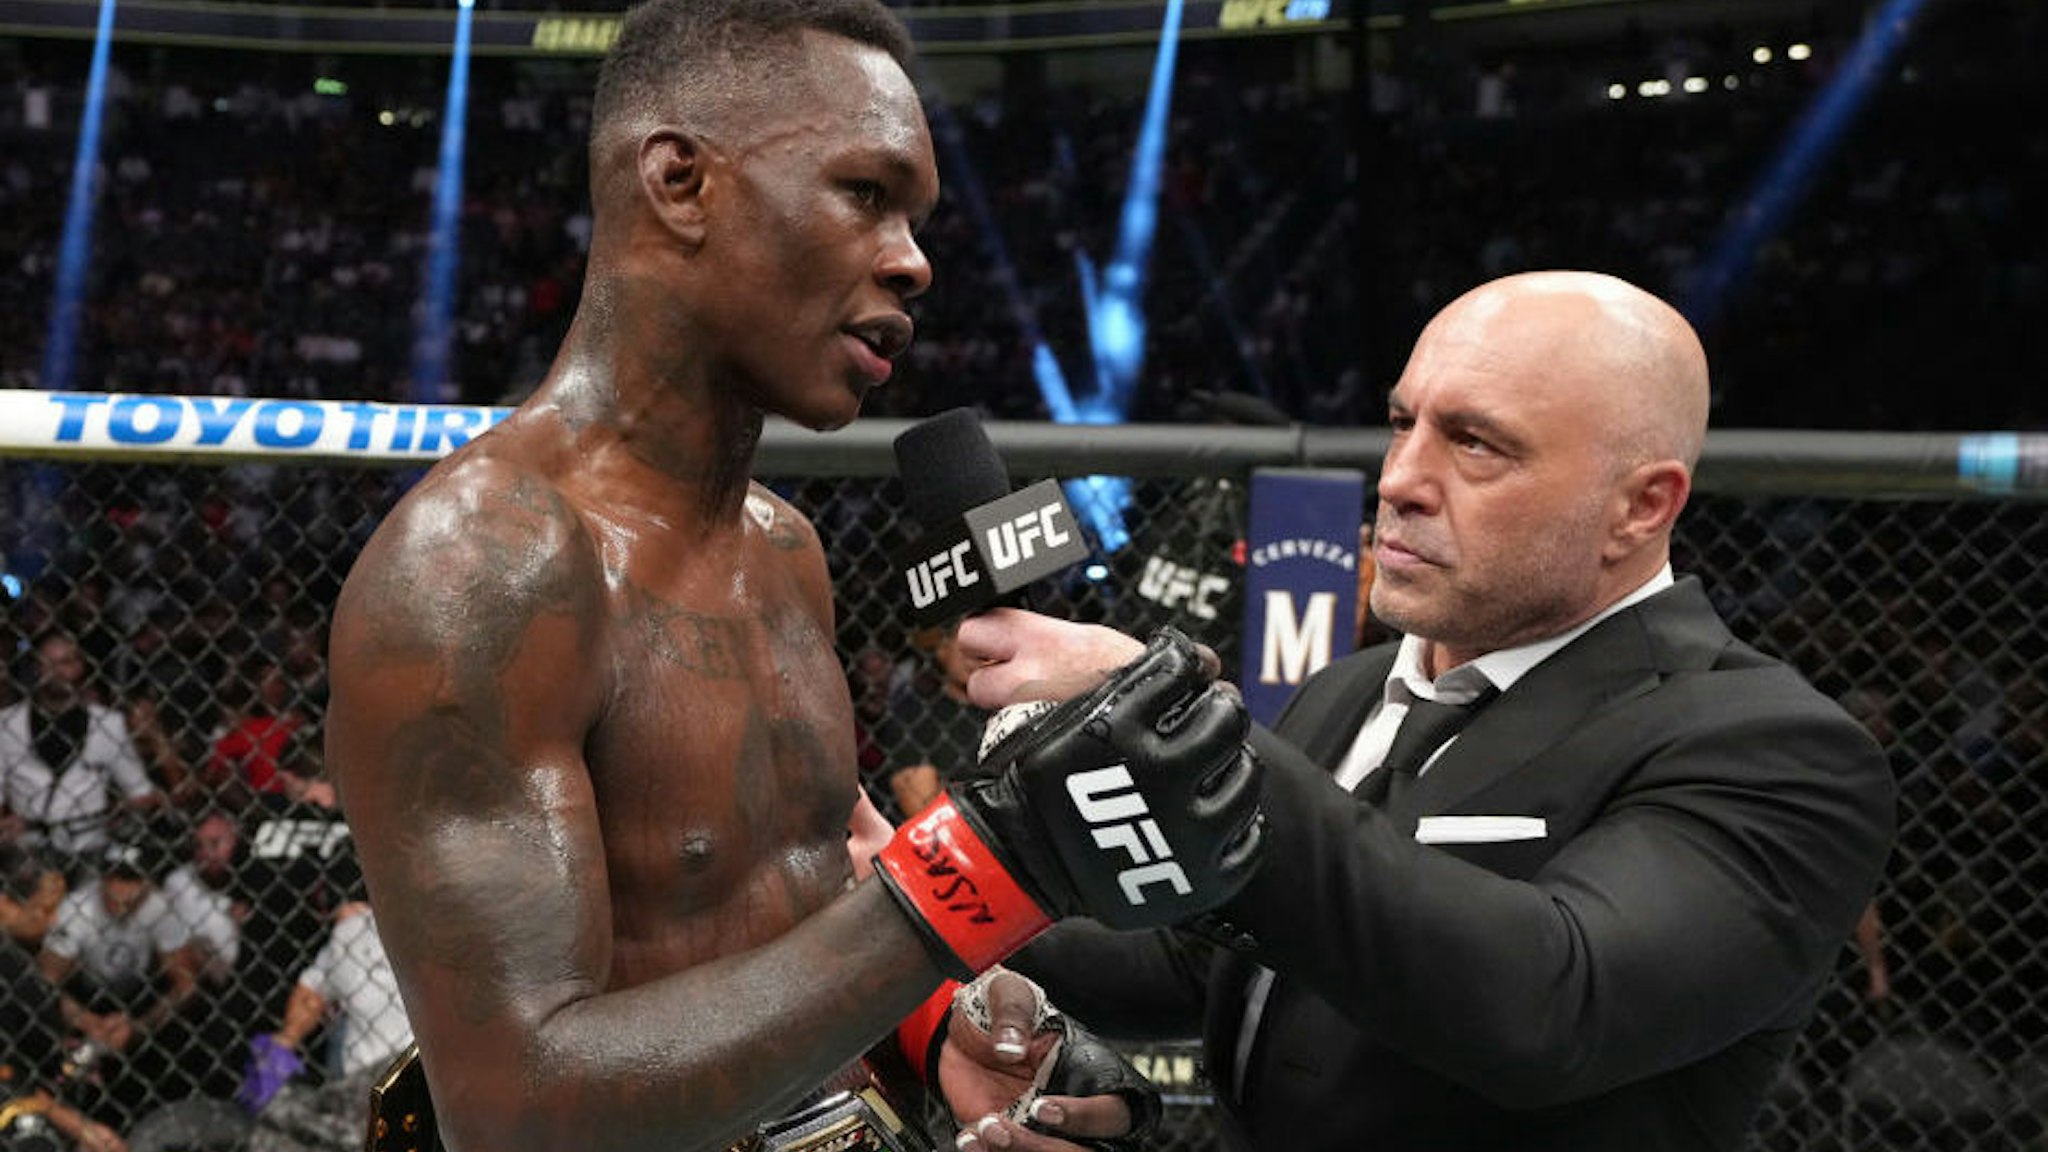 Israel Adesanya of Nigeria reacts to his win over Jared Cannonier in the UFC middleweight championship fight during the UFC 276 event at T-Mobile Arena on July 02, 2022 in Las Vegas, Nevada.